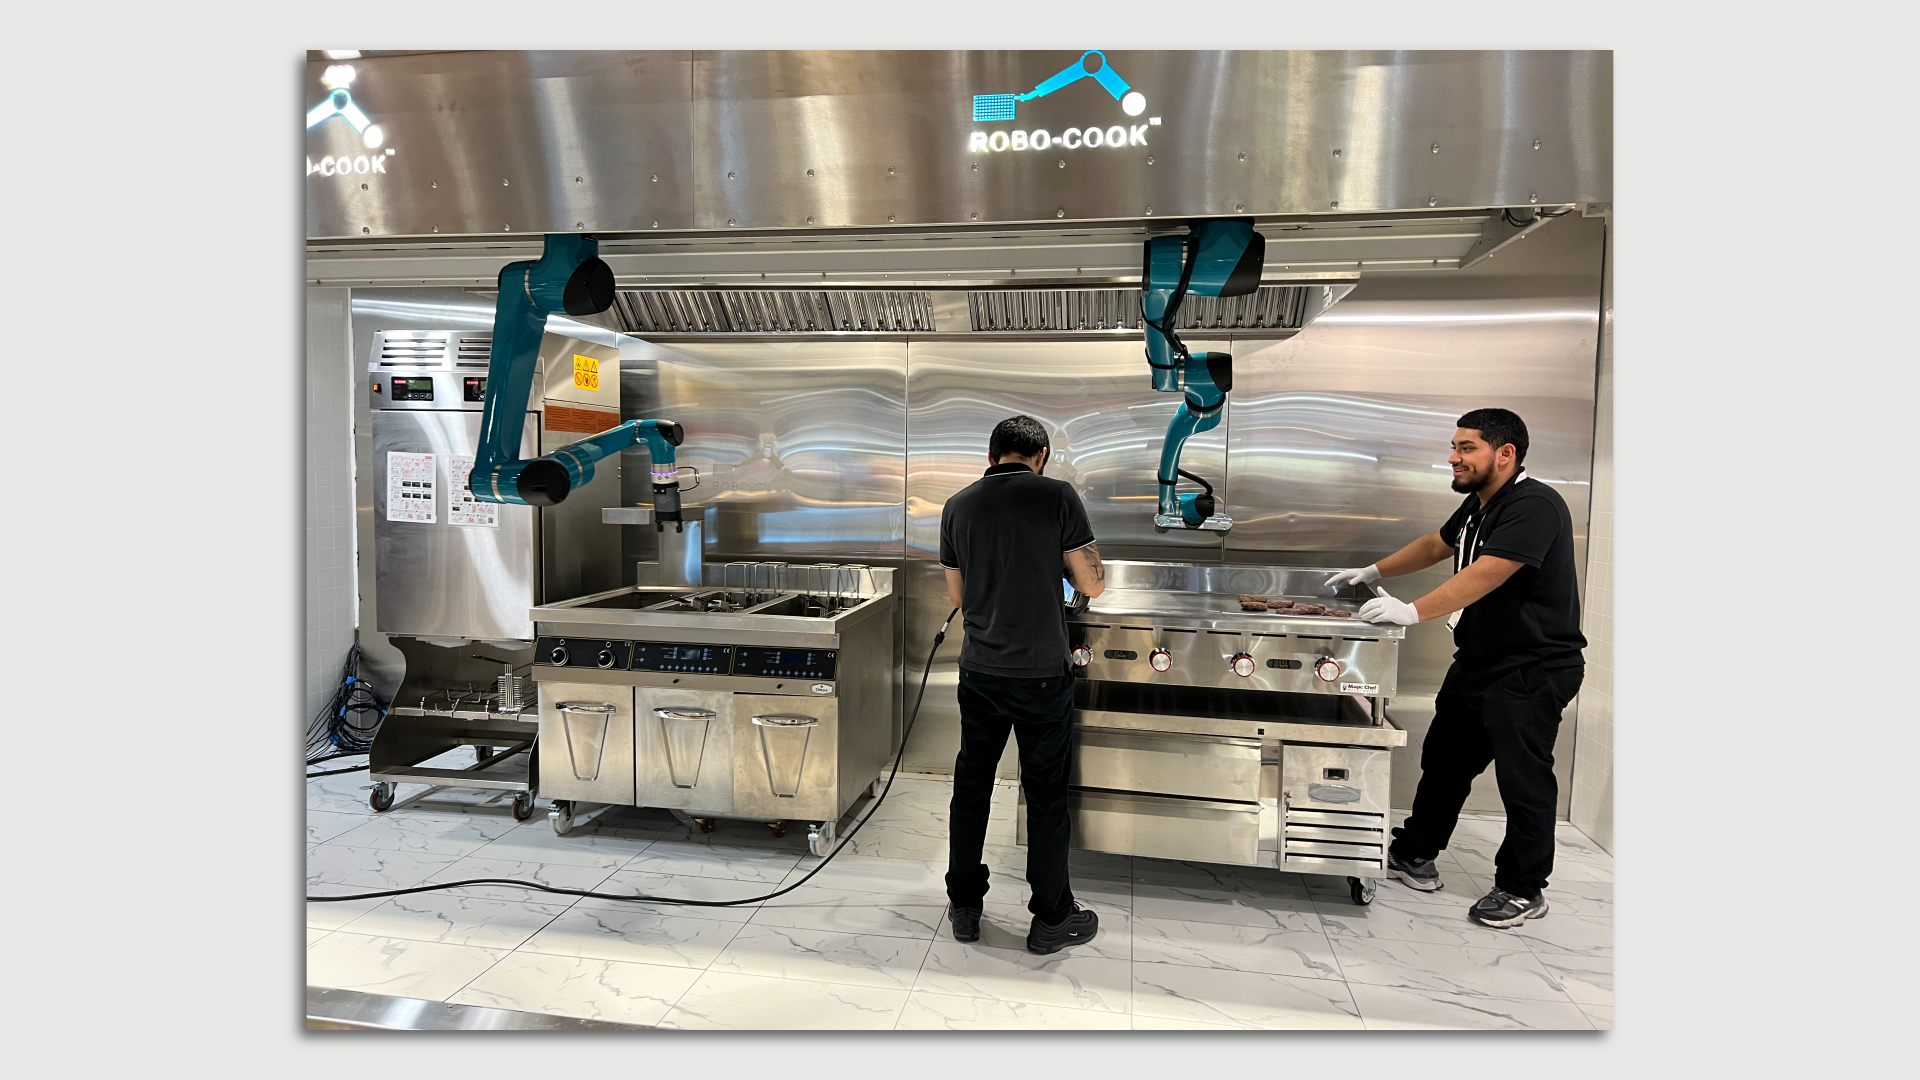 A large kitchen robotics system with two men standing around it.